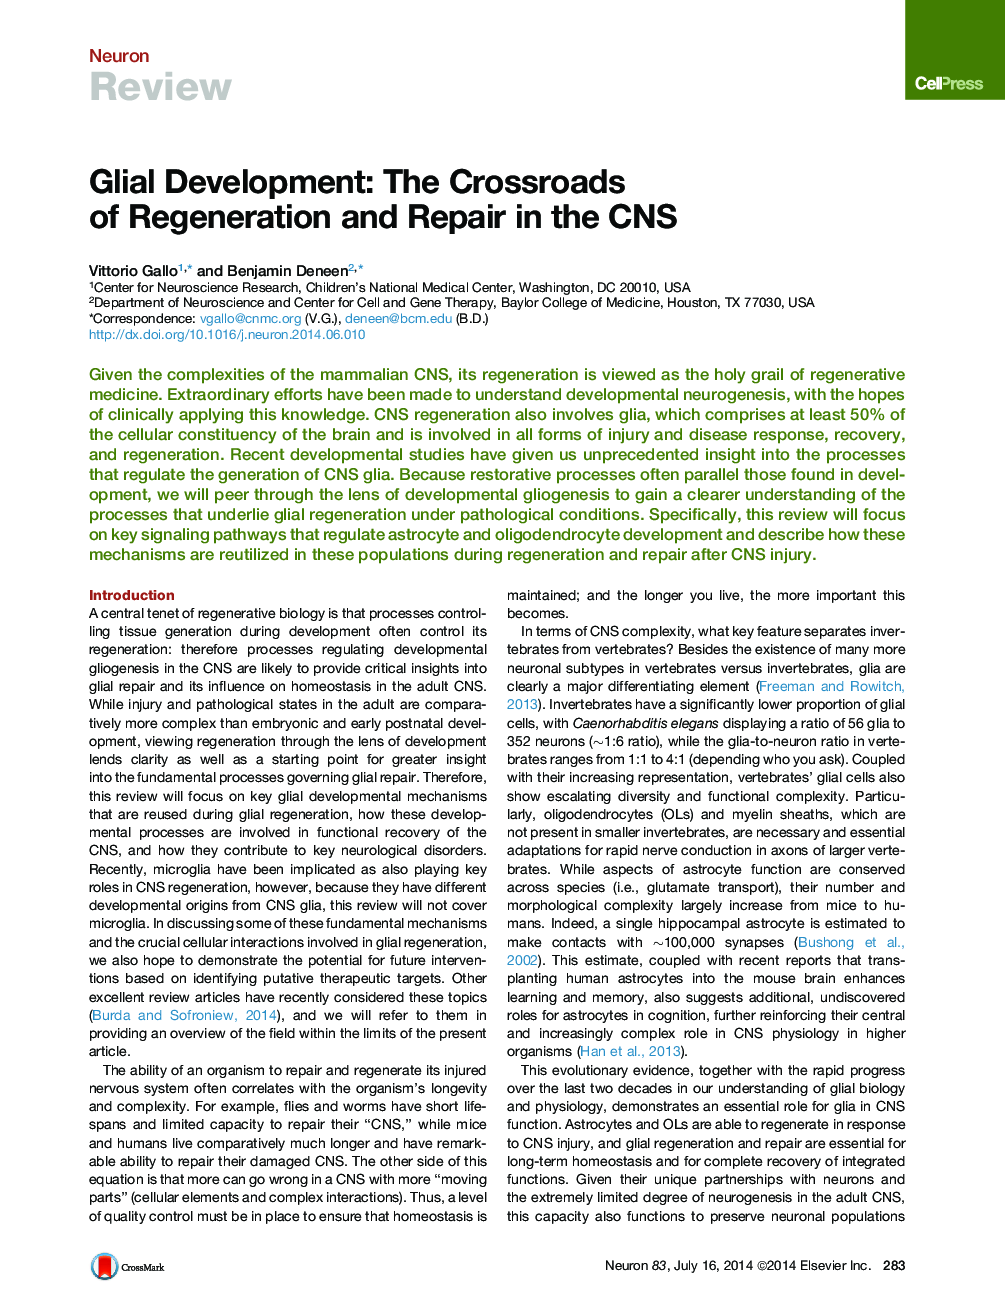 Glial Development: The Crossroads of Regeneration and Repair in the CNS